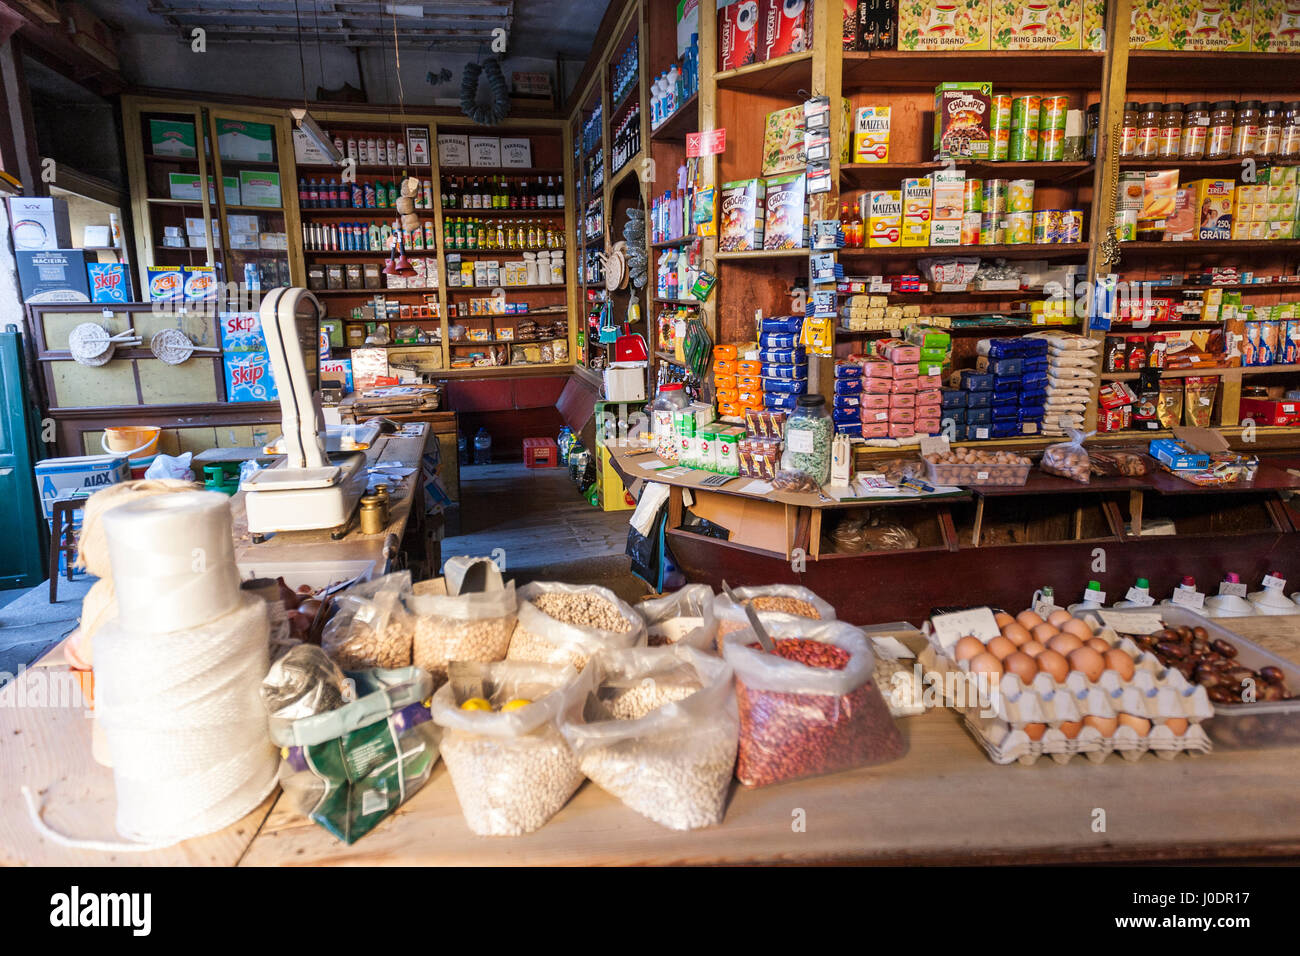 Interior of a traditional grocery Store Braga, Portugal Stock Photo